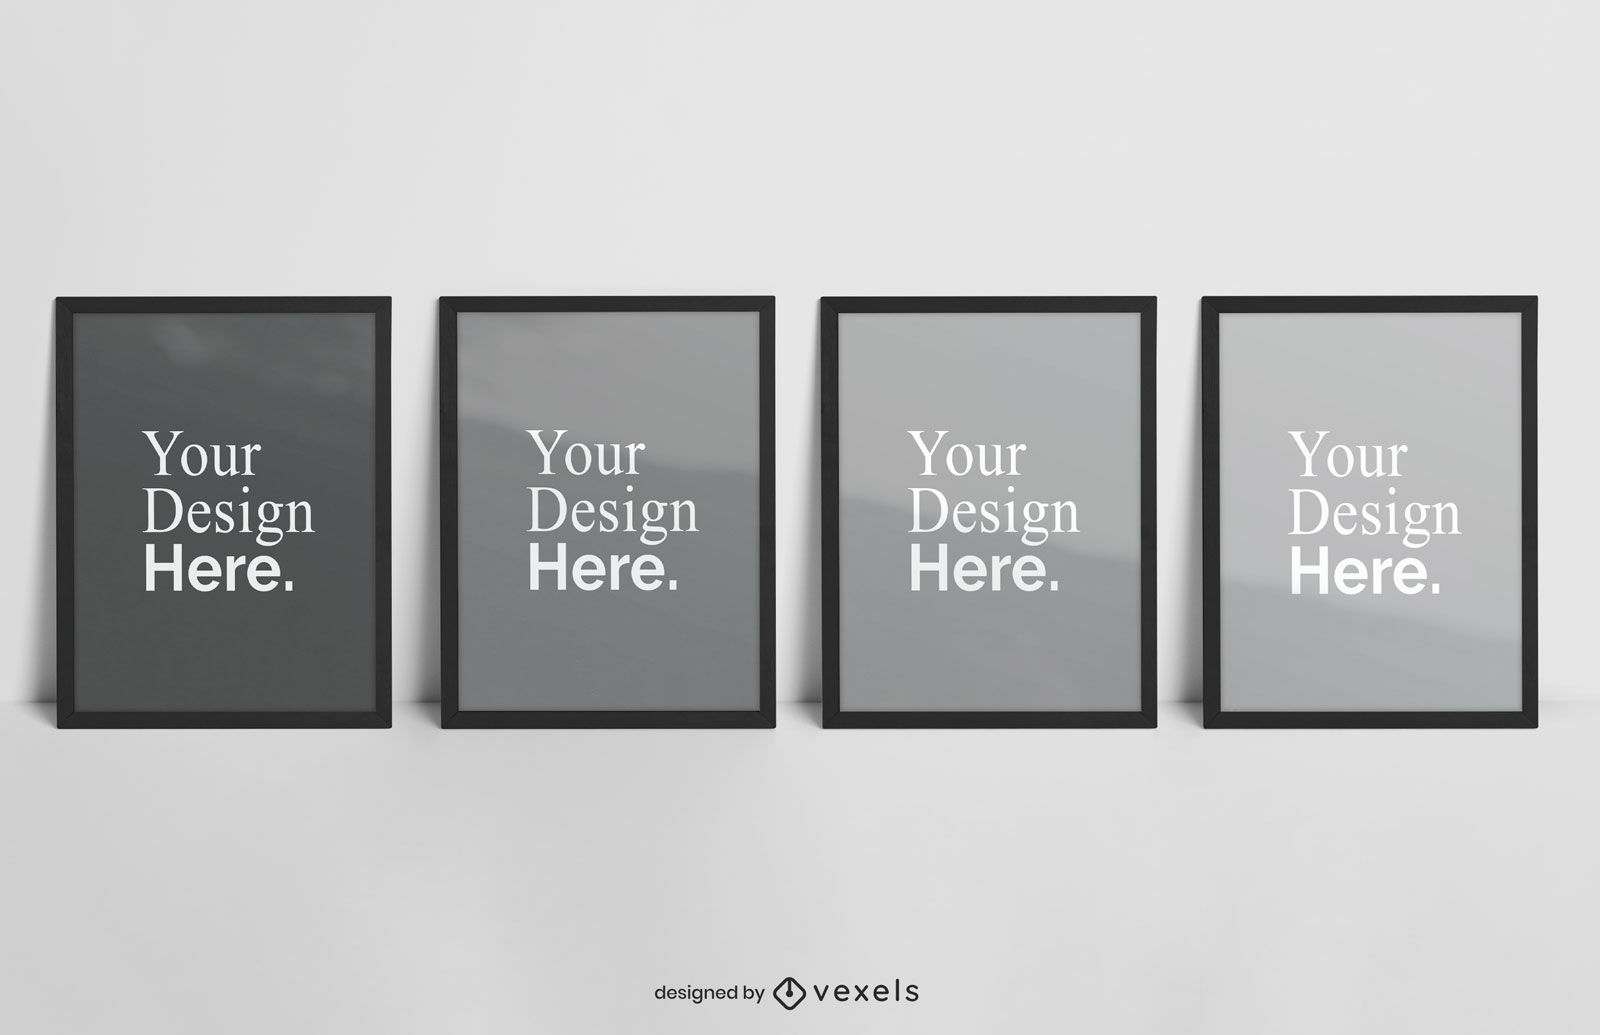 Four identical posters mockup design